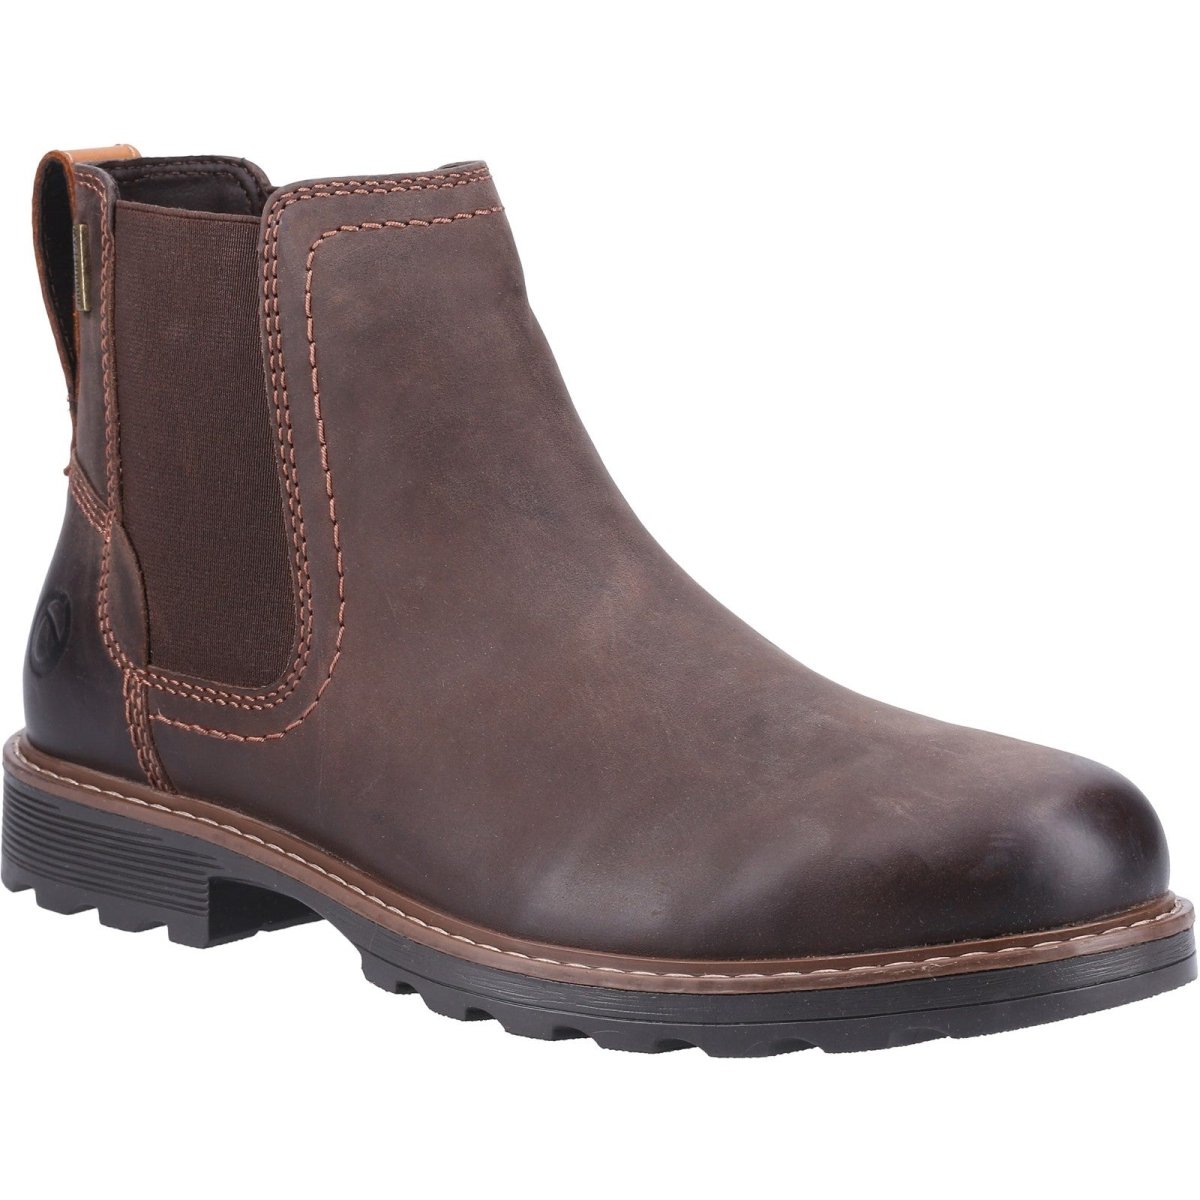 Cotswold Nibley Boots - Shoe Store Direct